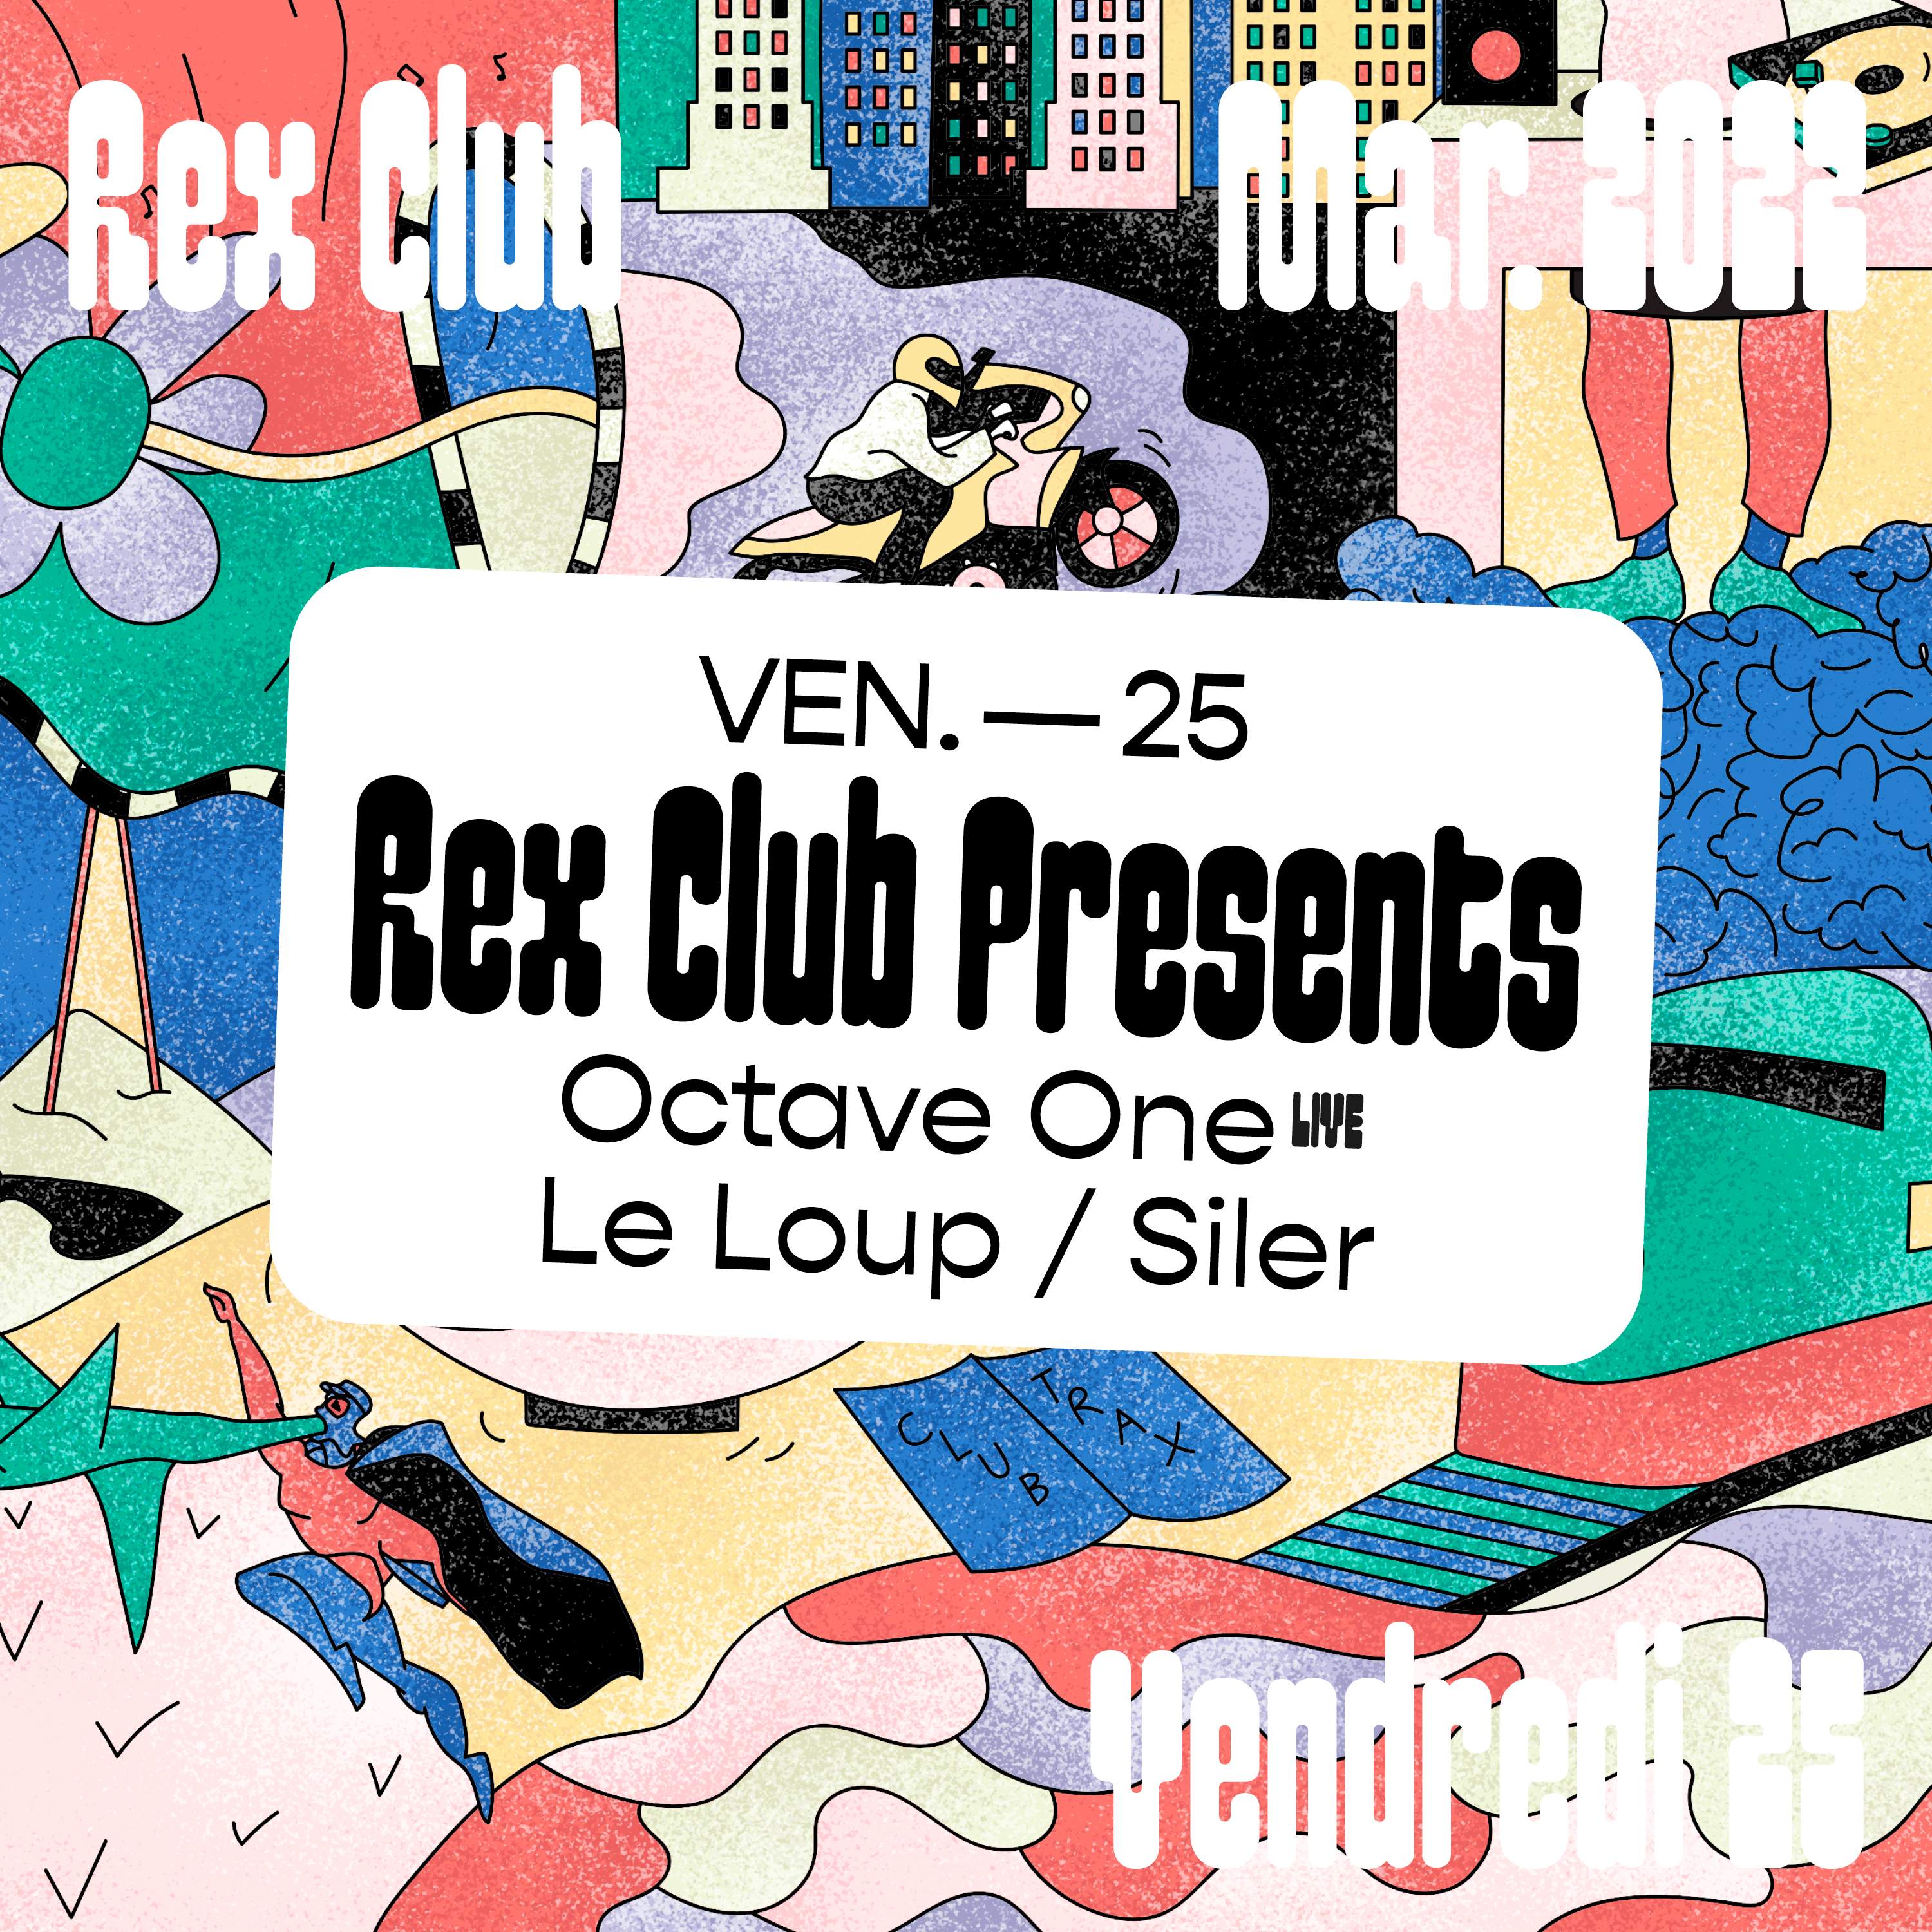 Rex Club presents: Octave One Live, Le Loup, Siler - フライヤー表